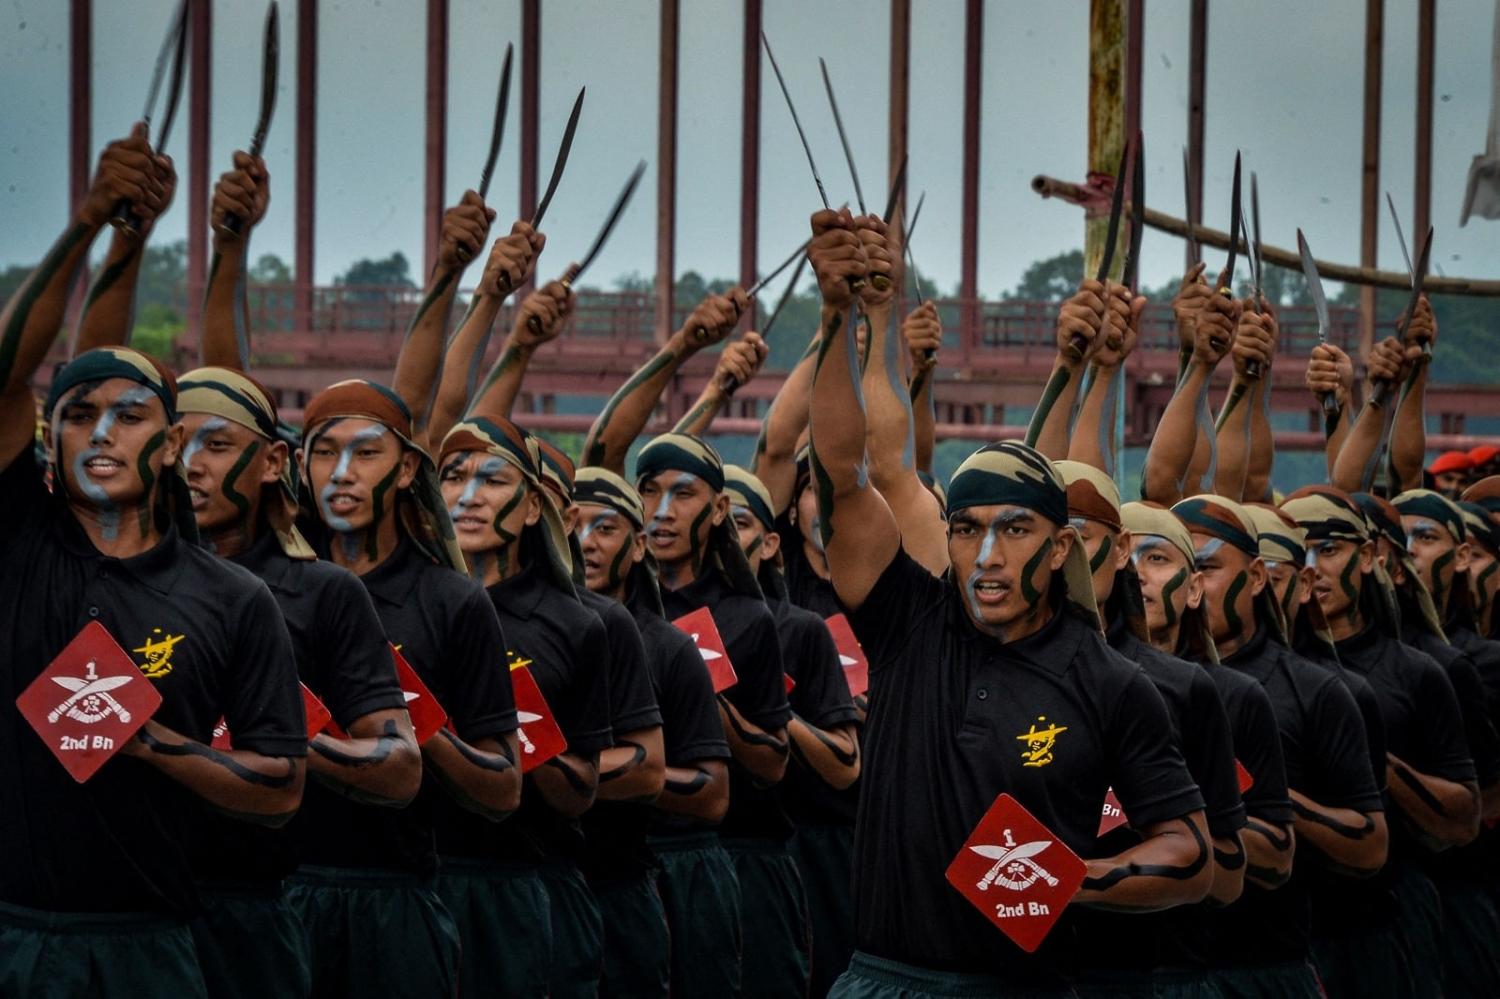 Armed personnel from Gorkha rifles take part in a Khukri (knife) dance as part of India's 75th Independence Day celebrations, 15 August 2021 (Diptendu Dutta/AFP via Getty Images)